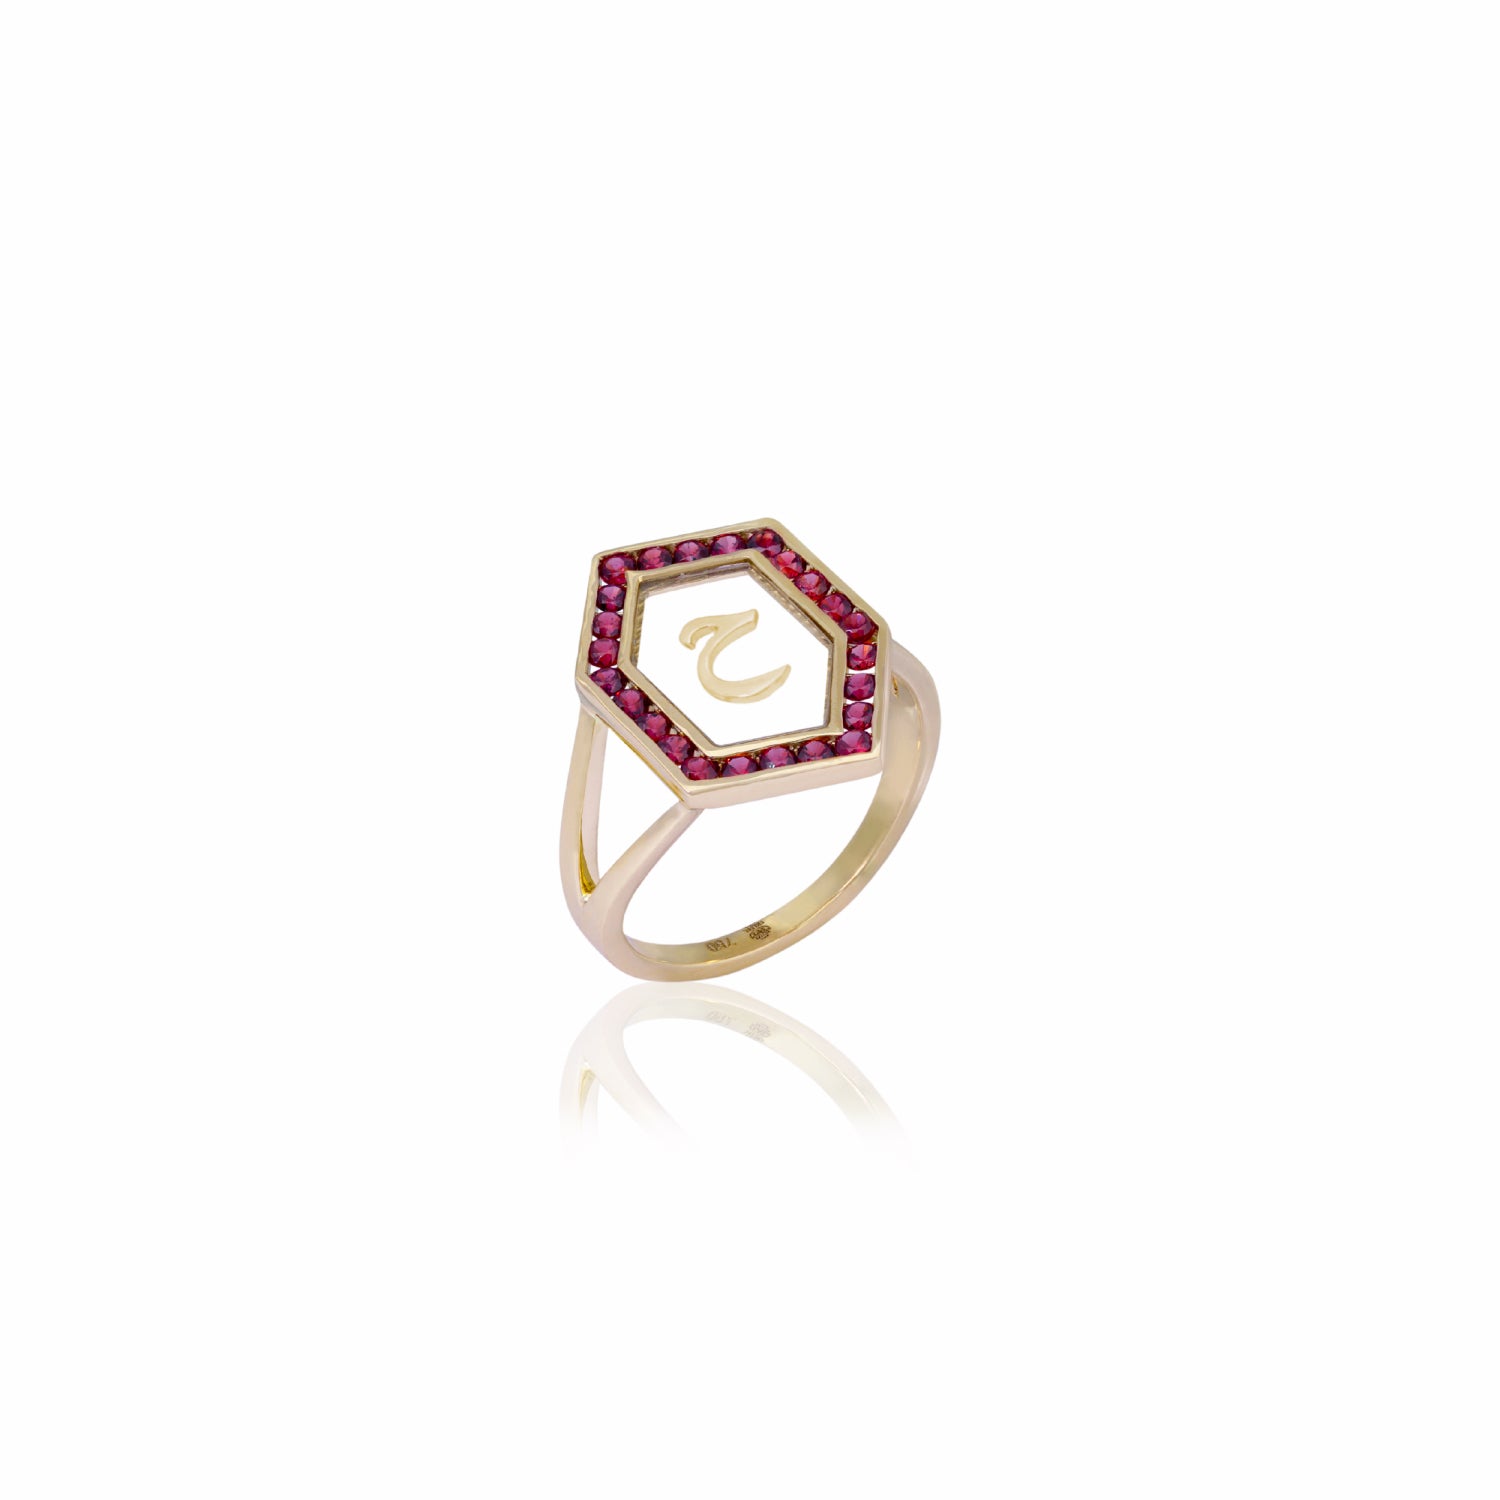 Qamoos 1.0 Letter ح Ruby Ring in Yellow Gold